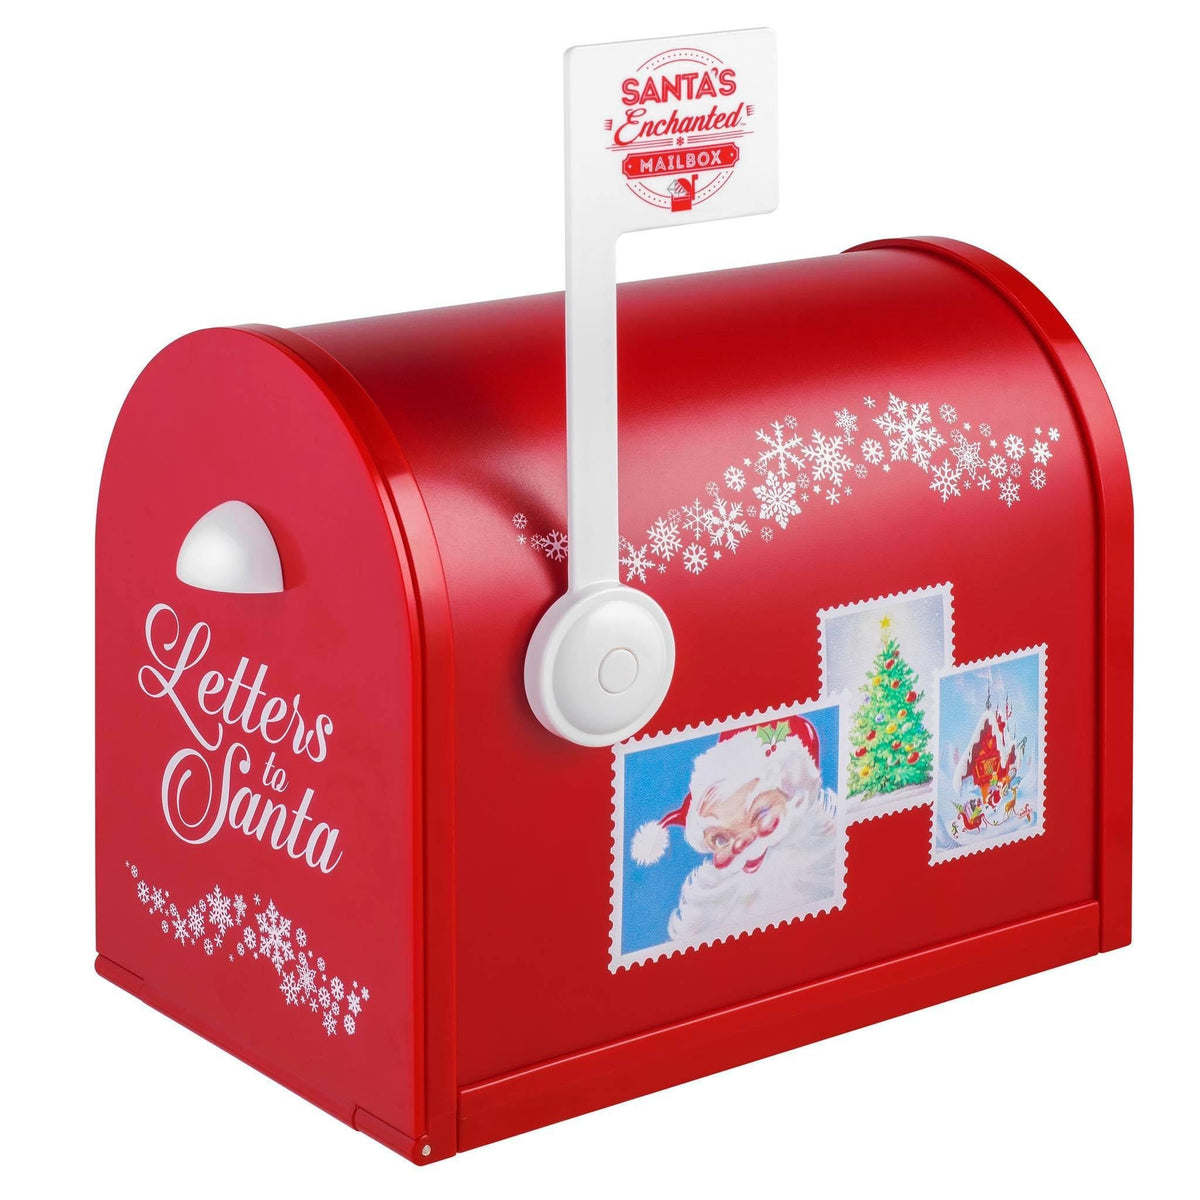 Letters to Santa are answered after they're left in a 'magical mailbox